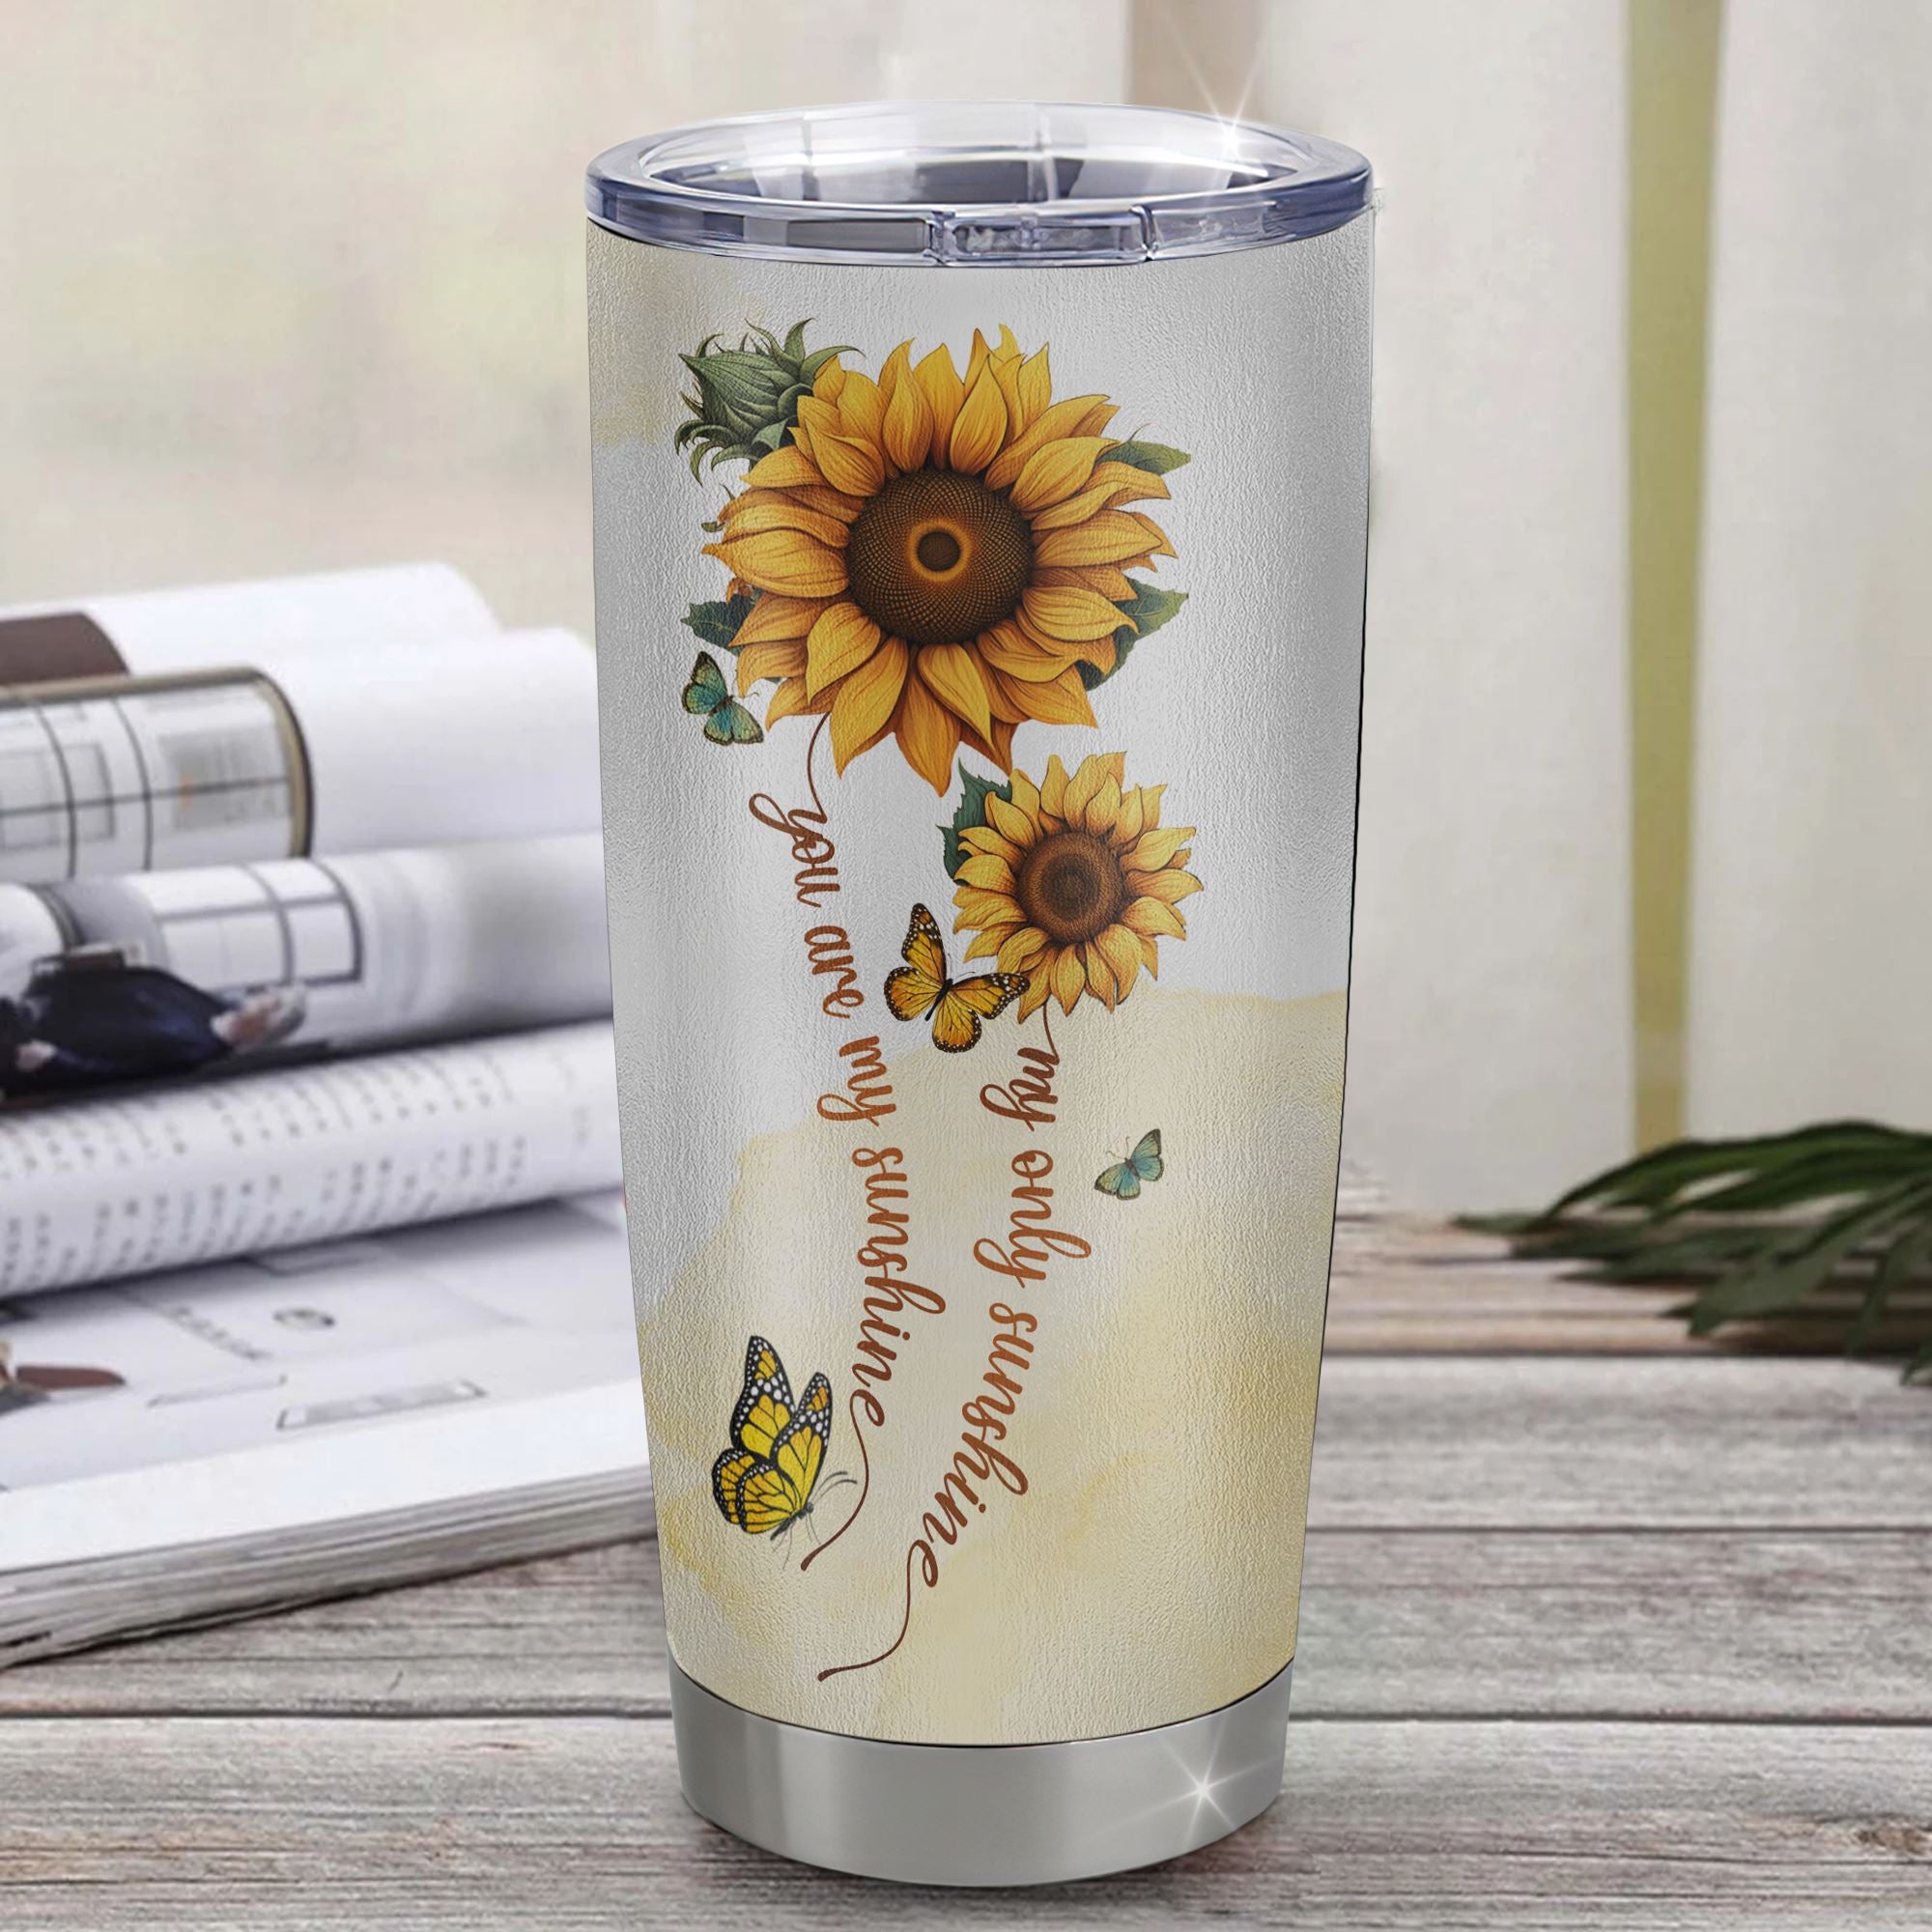 Personalized_To_My_Niece_Tumbler_From_Aunt_Stainless_Steel_Cup_Sunflower_Never_Forget_That_I_Love_You_Niece_Gift_Birthday_Graduation_Christmas_Travel_Mug_Tumbler_mockup_1.jpg